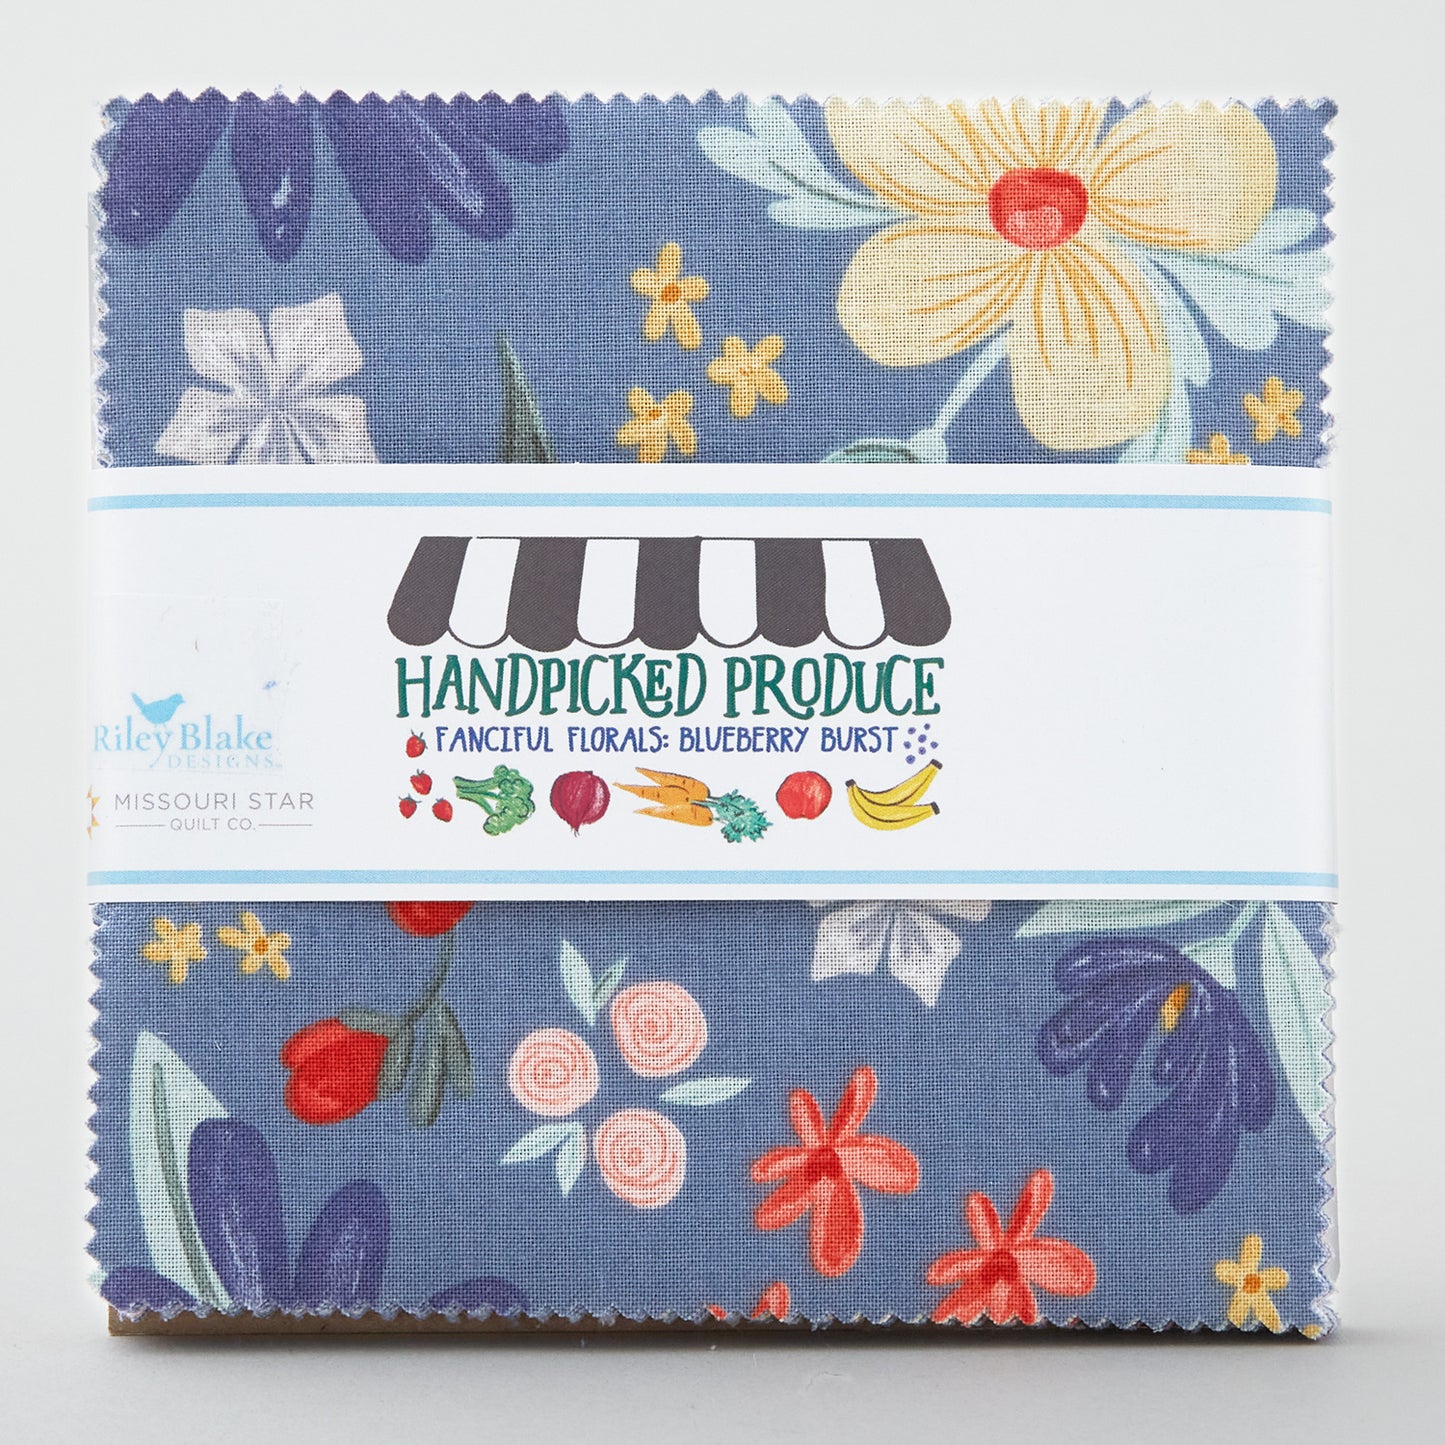 Handpicked Produce - Fanciful Florals Blueberry Burst 5" Stackers 24 pcs. Alternative View #1